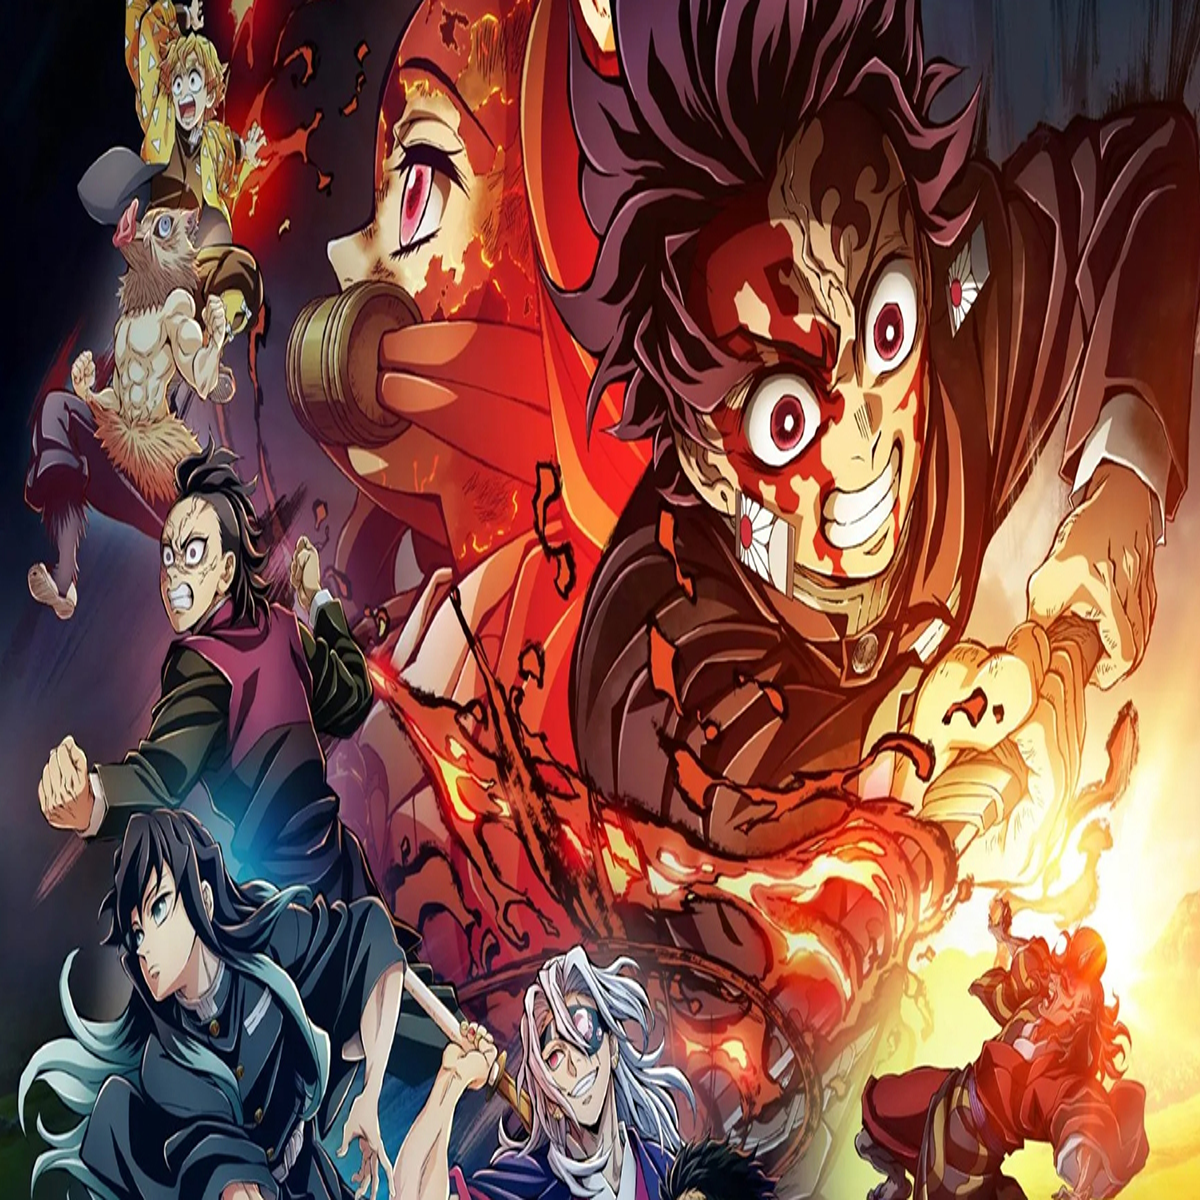 Which Of The Nine Hashira Are You From Demon Slayer? in 2023